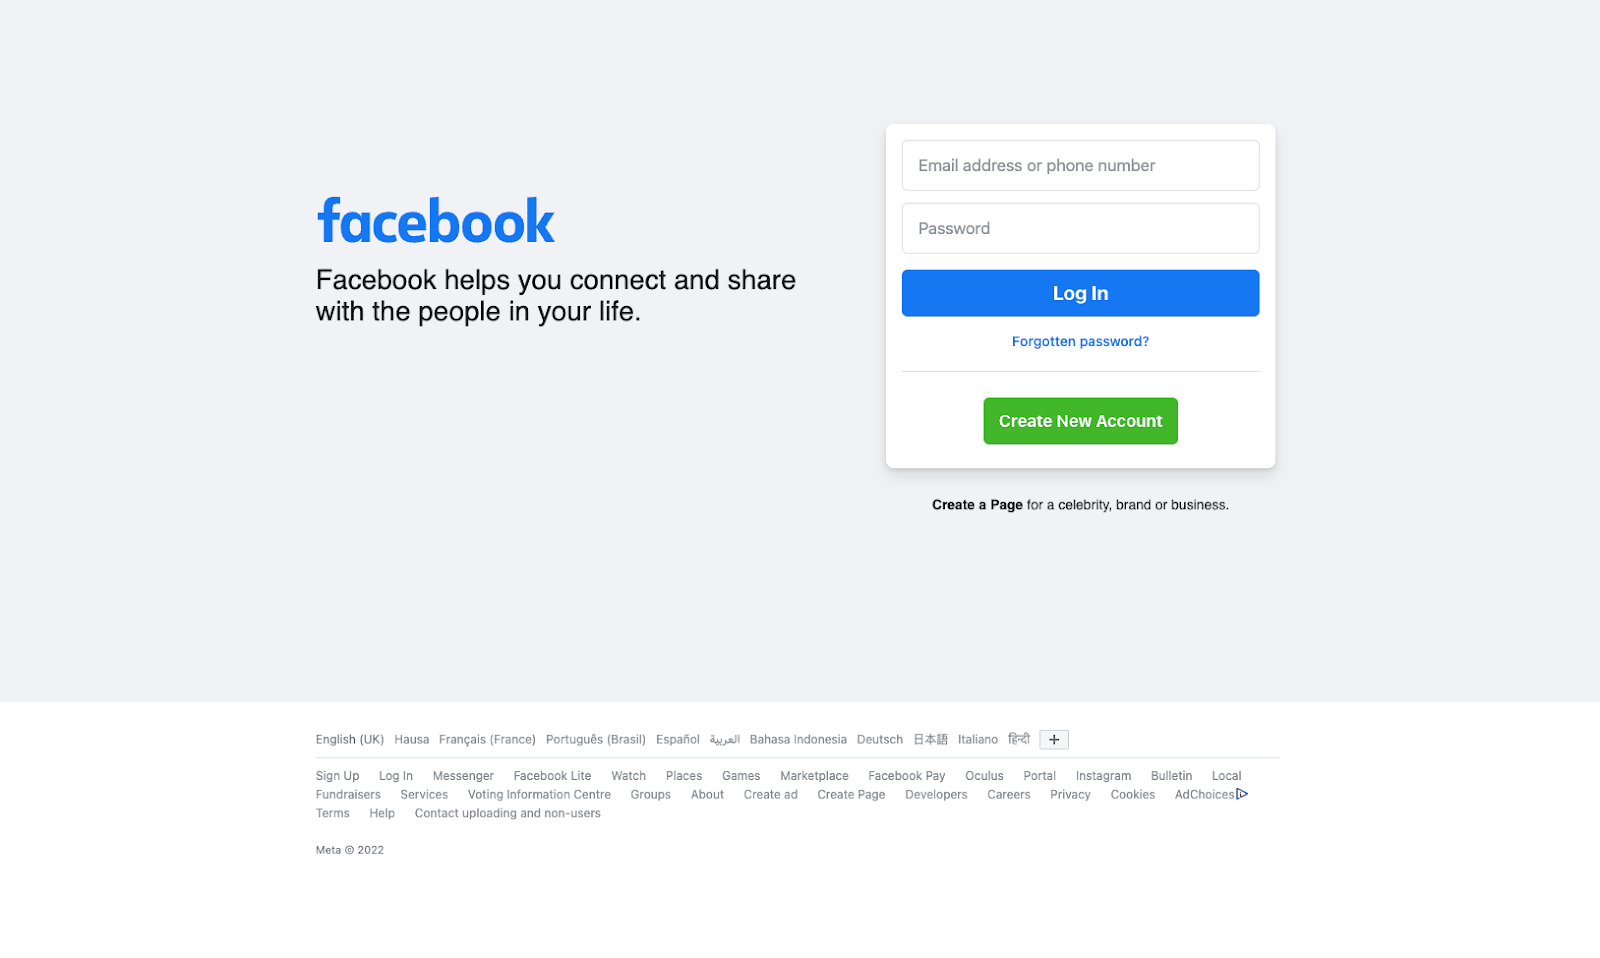 A screenshot of the Facebook login page.